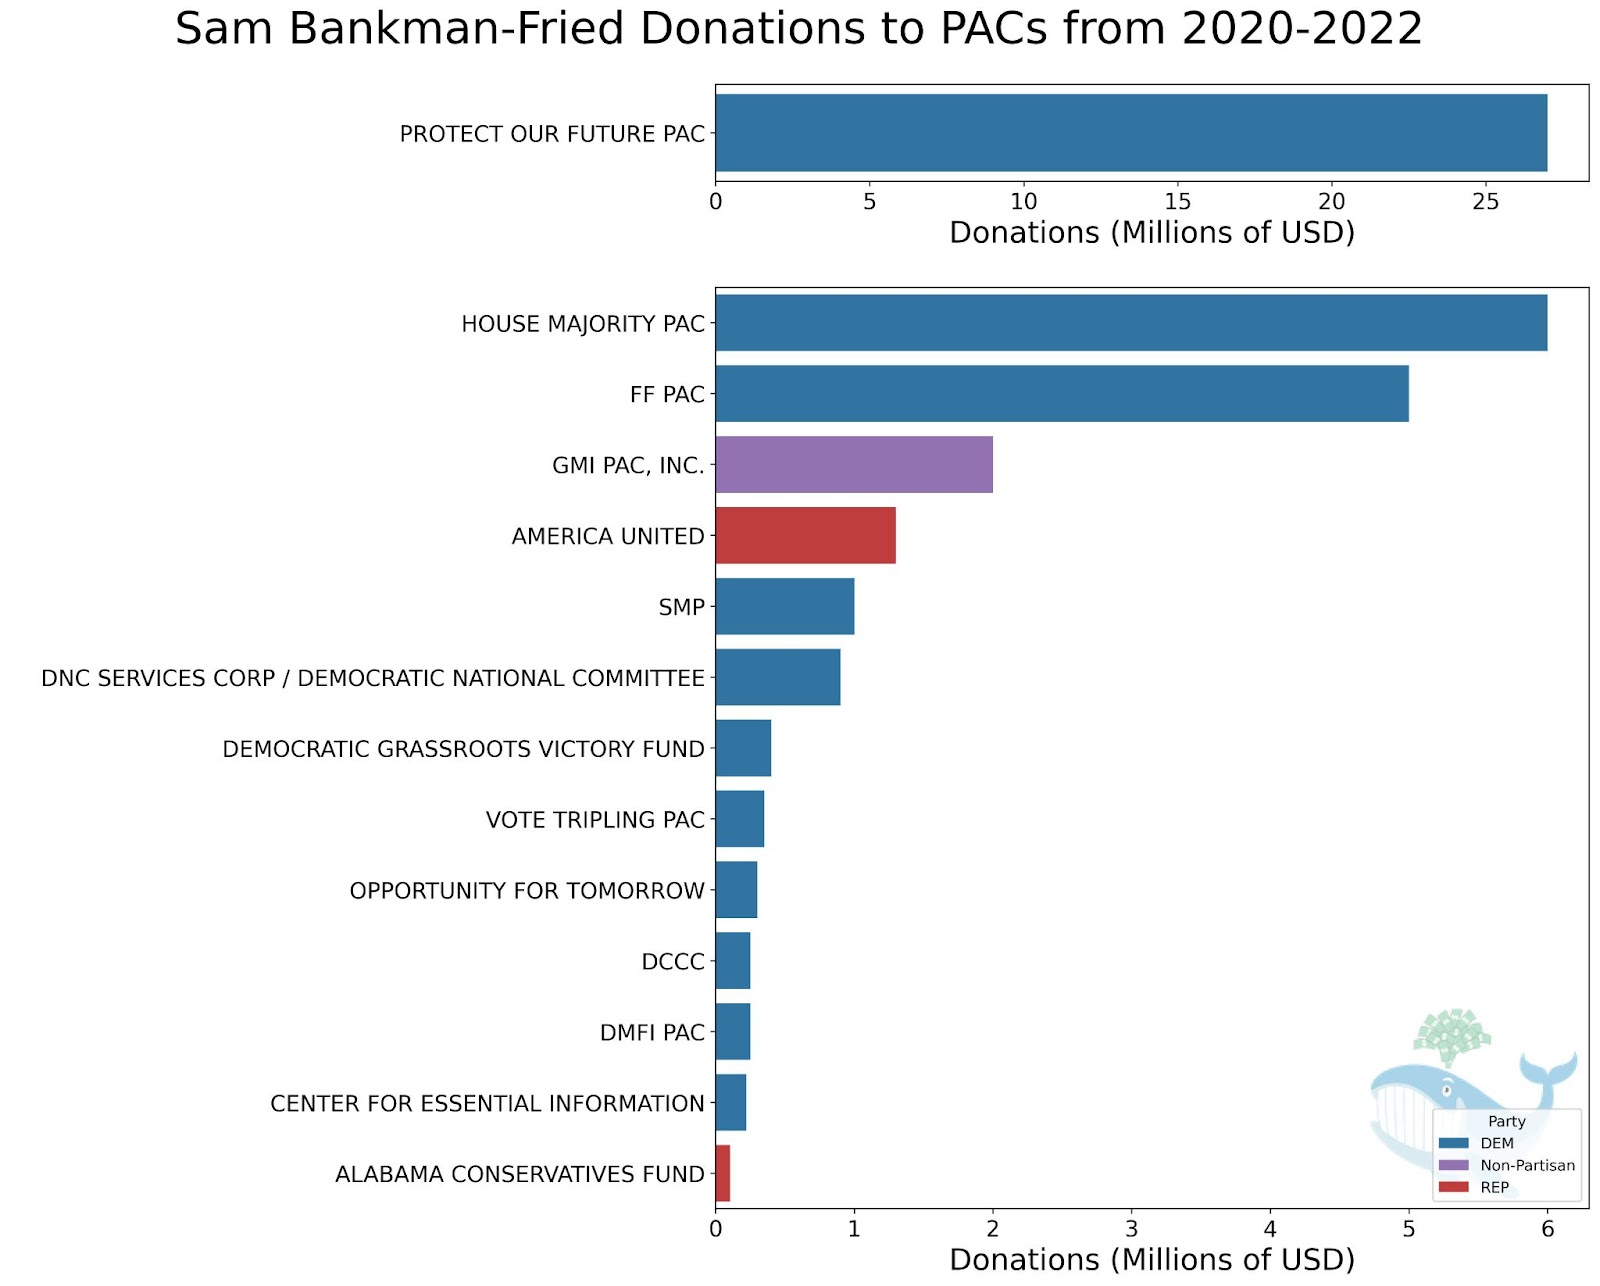 SBF’s donations to PACs.